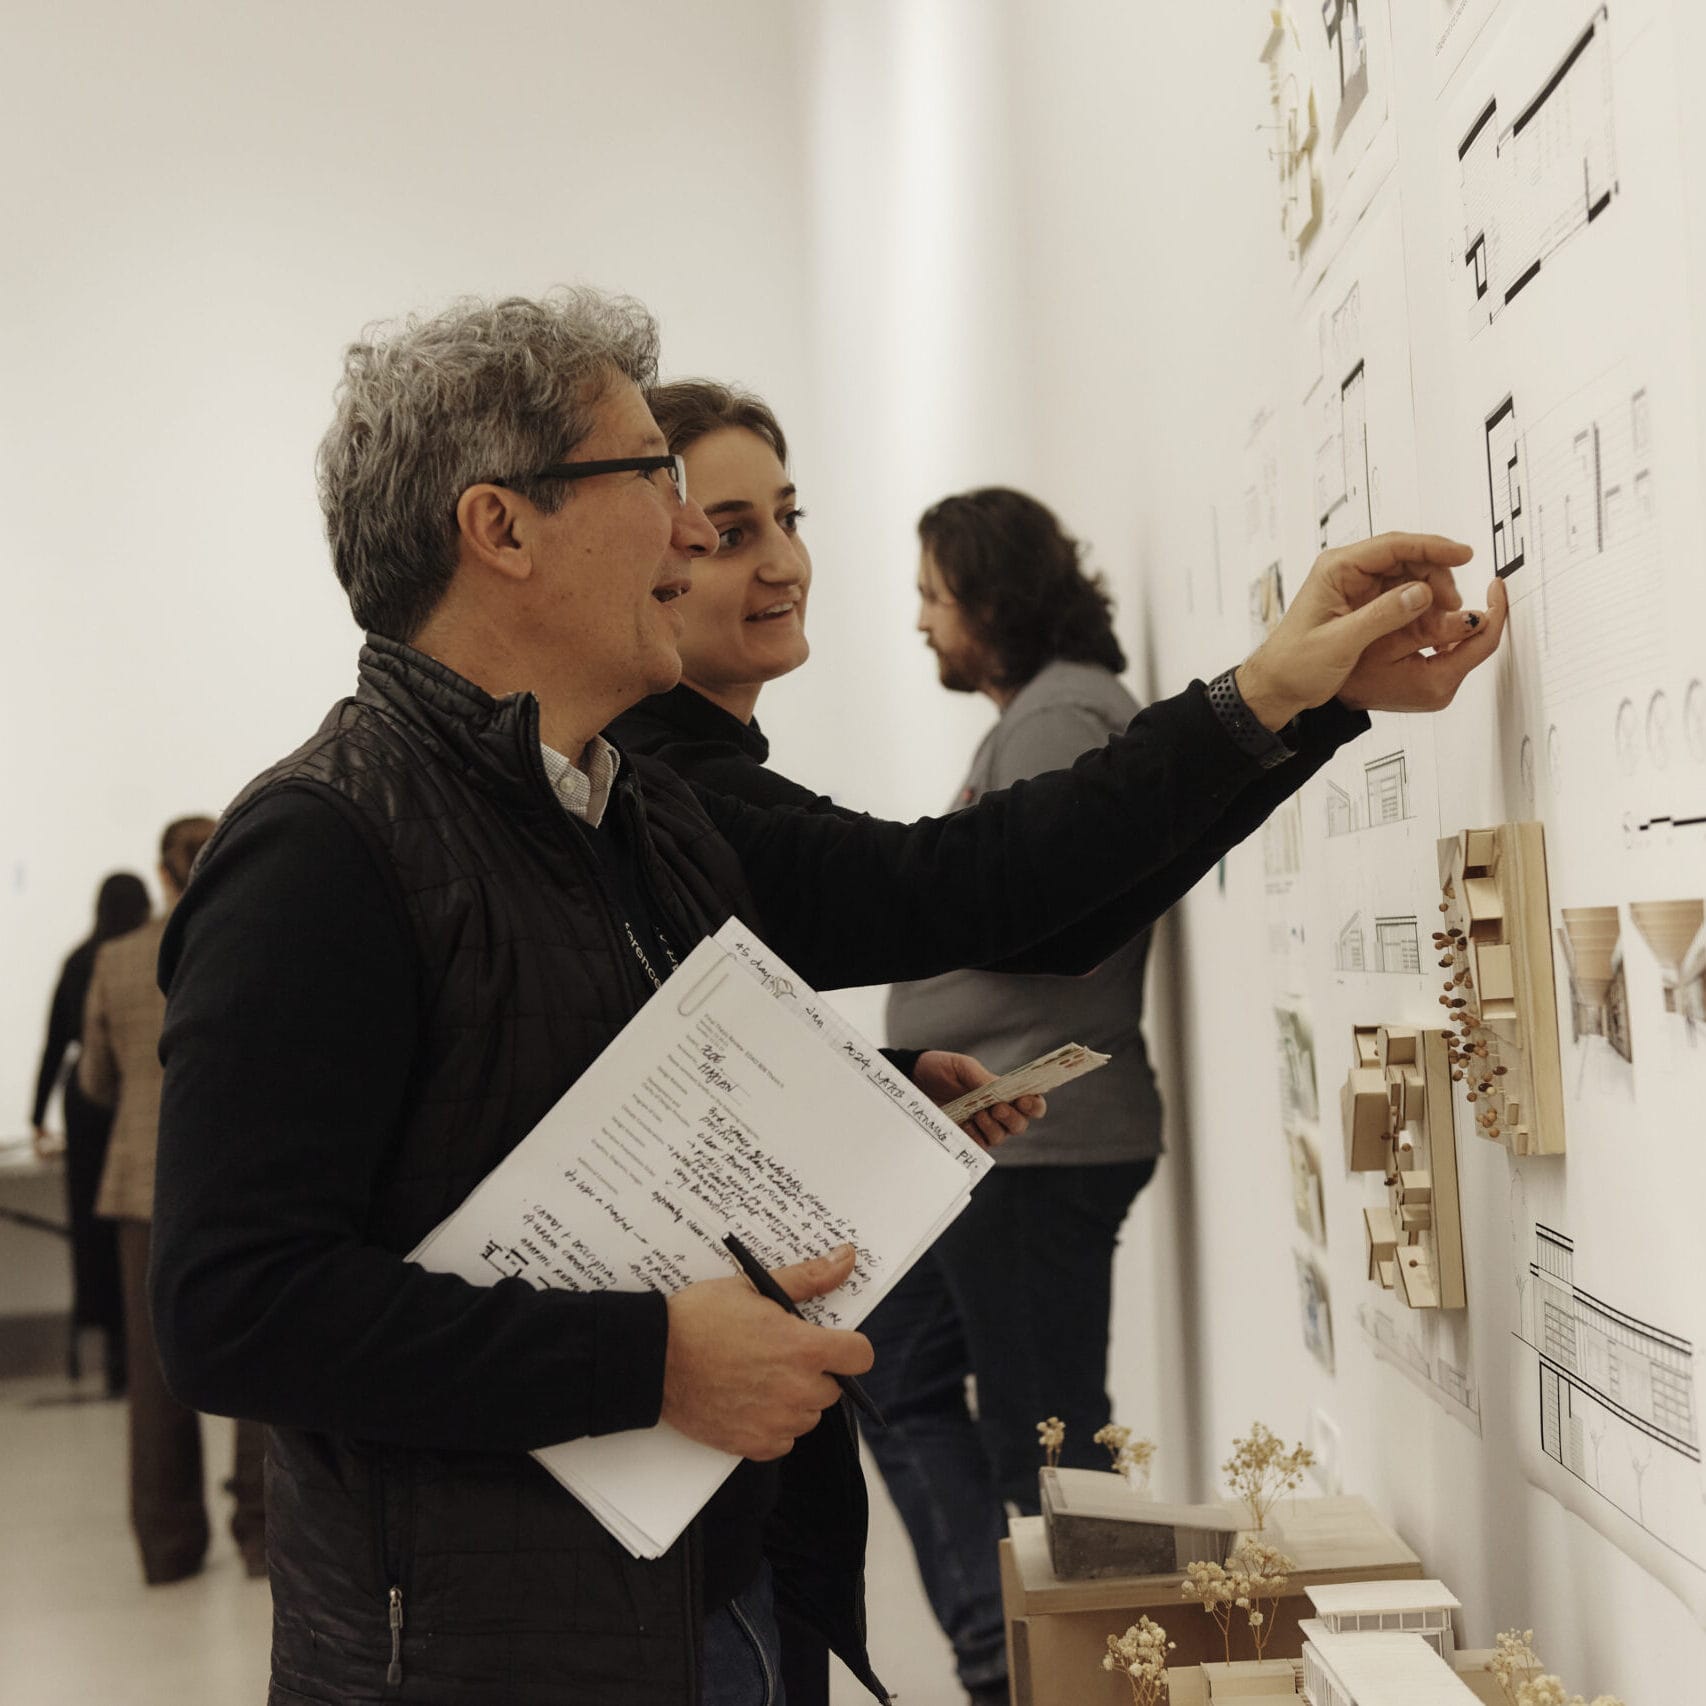 A faculty member smiles and points to a student's project on the wall, while the student looks on.